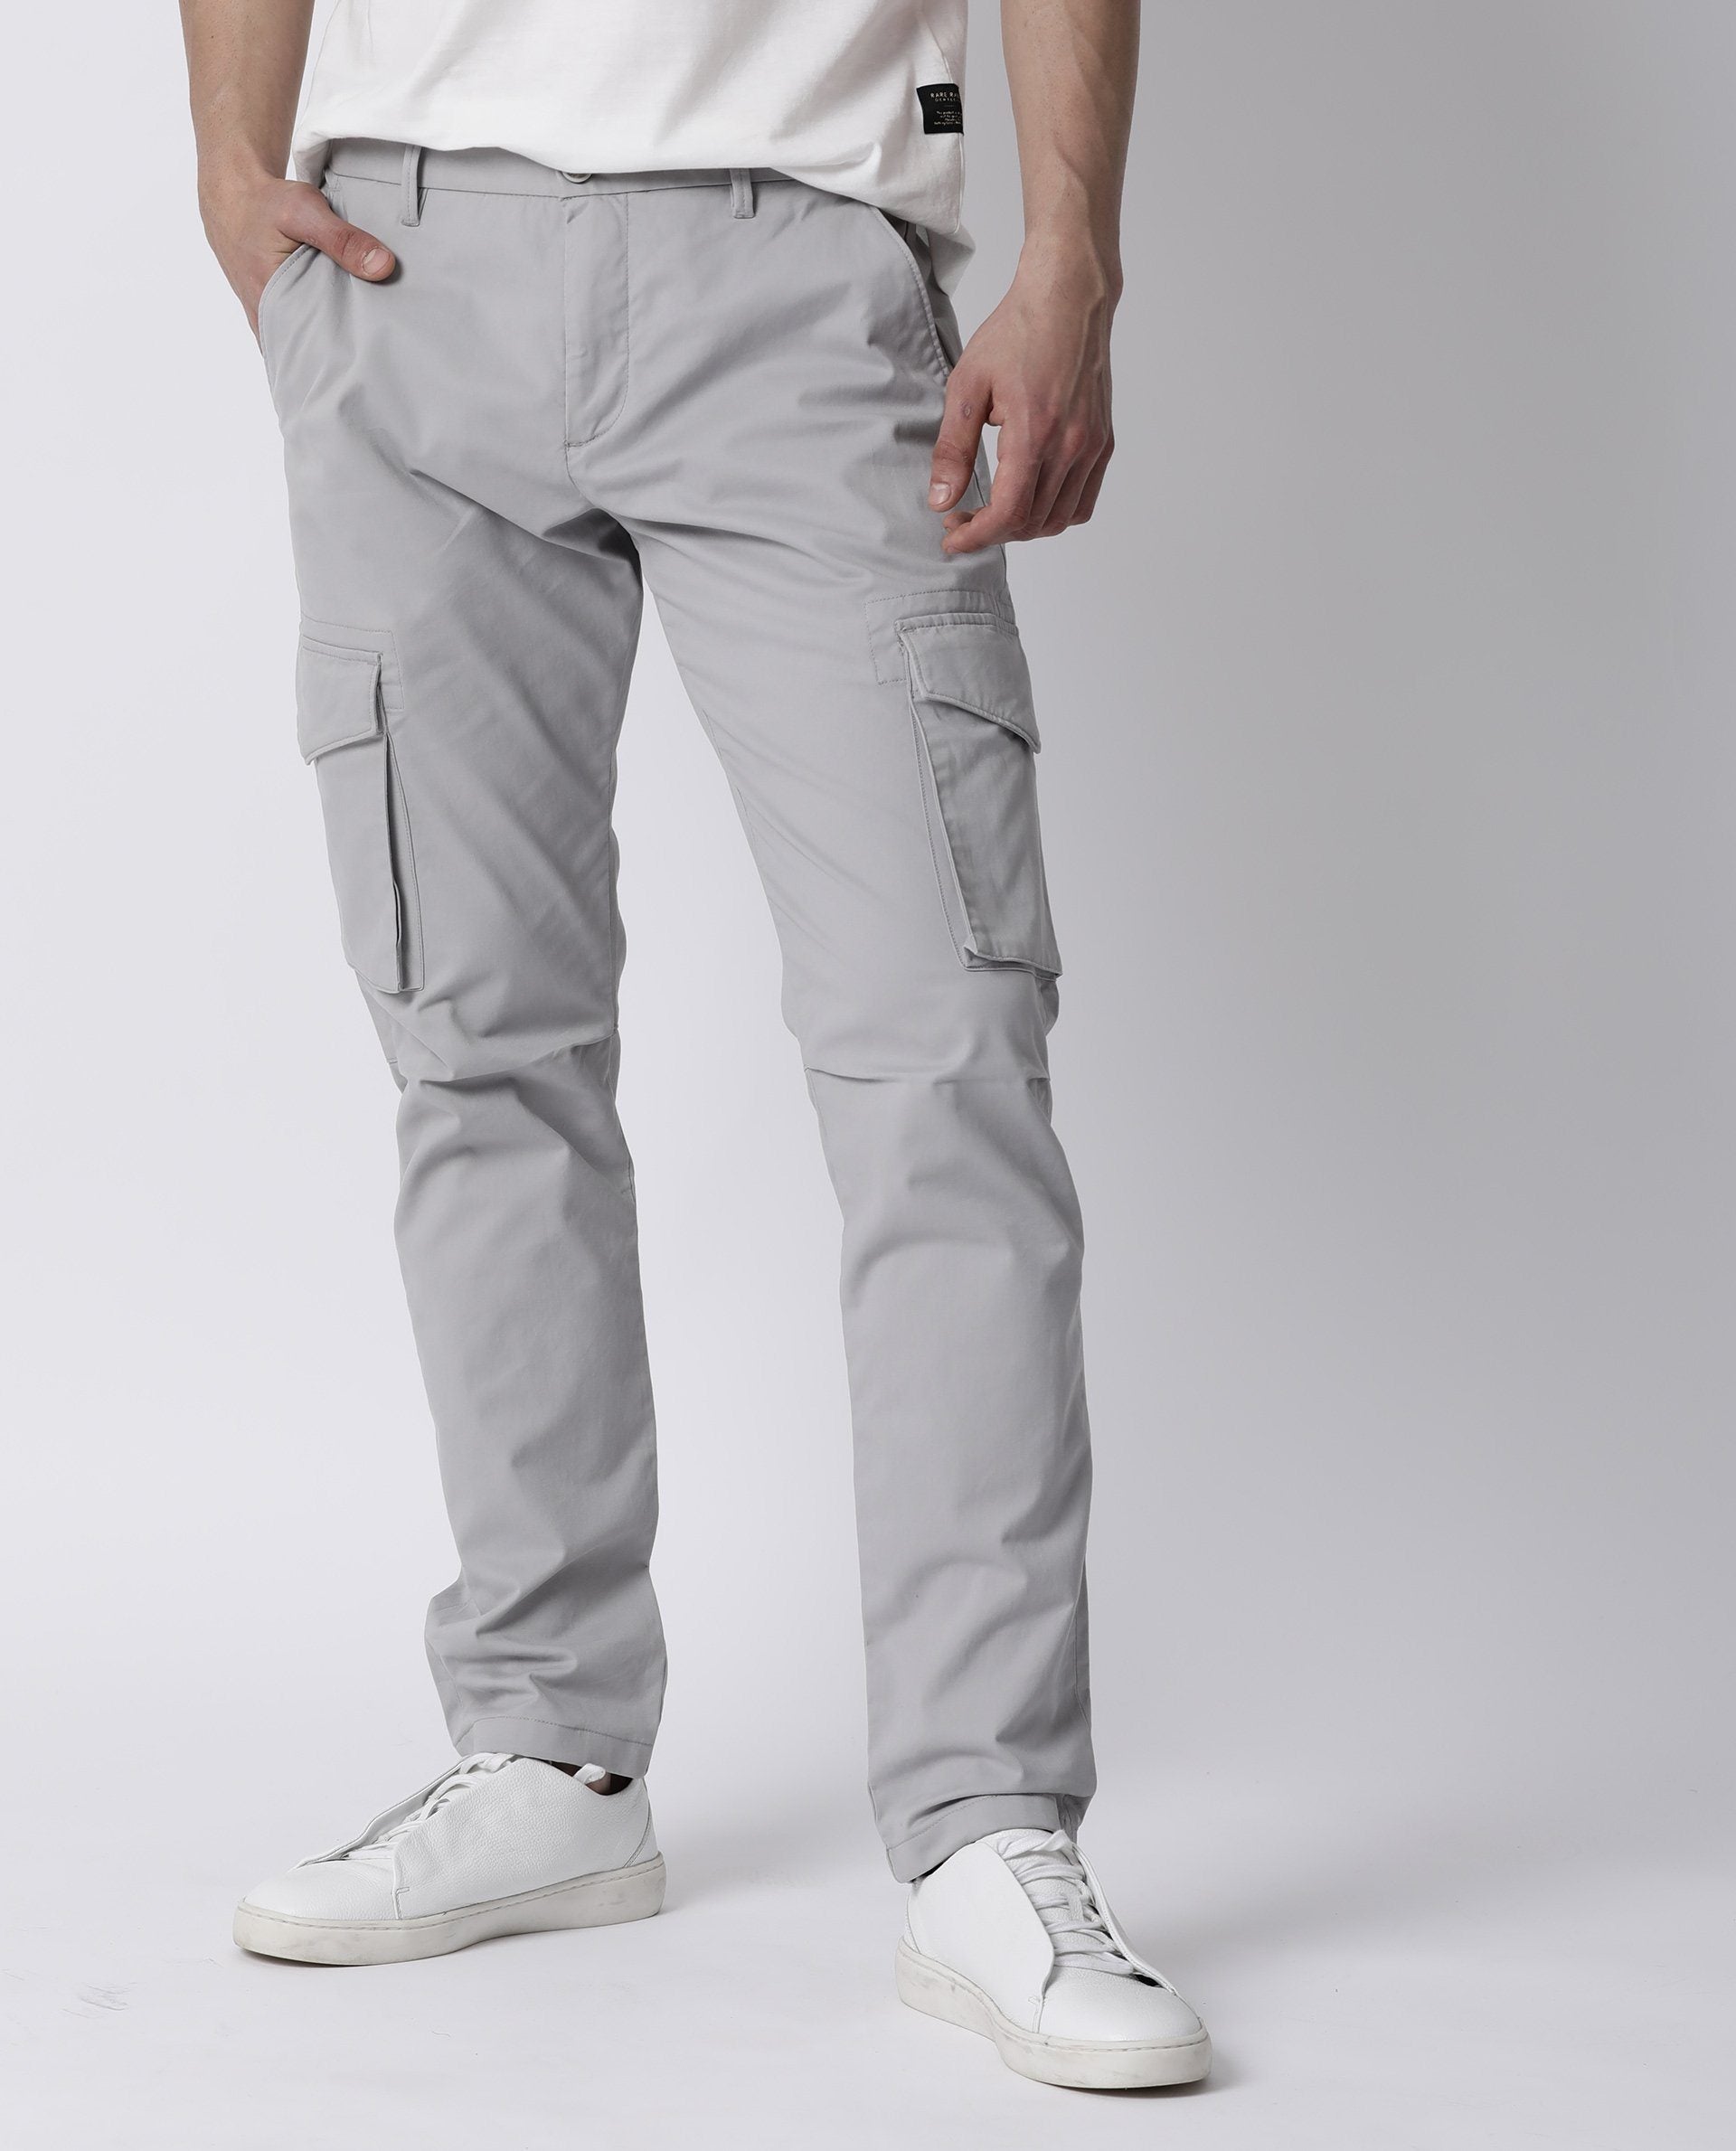 Buy Grey Trousers  Pants for Men by SNITCH Online  Ajiocom